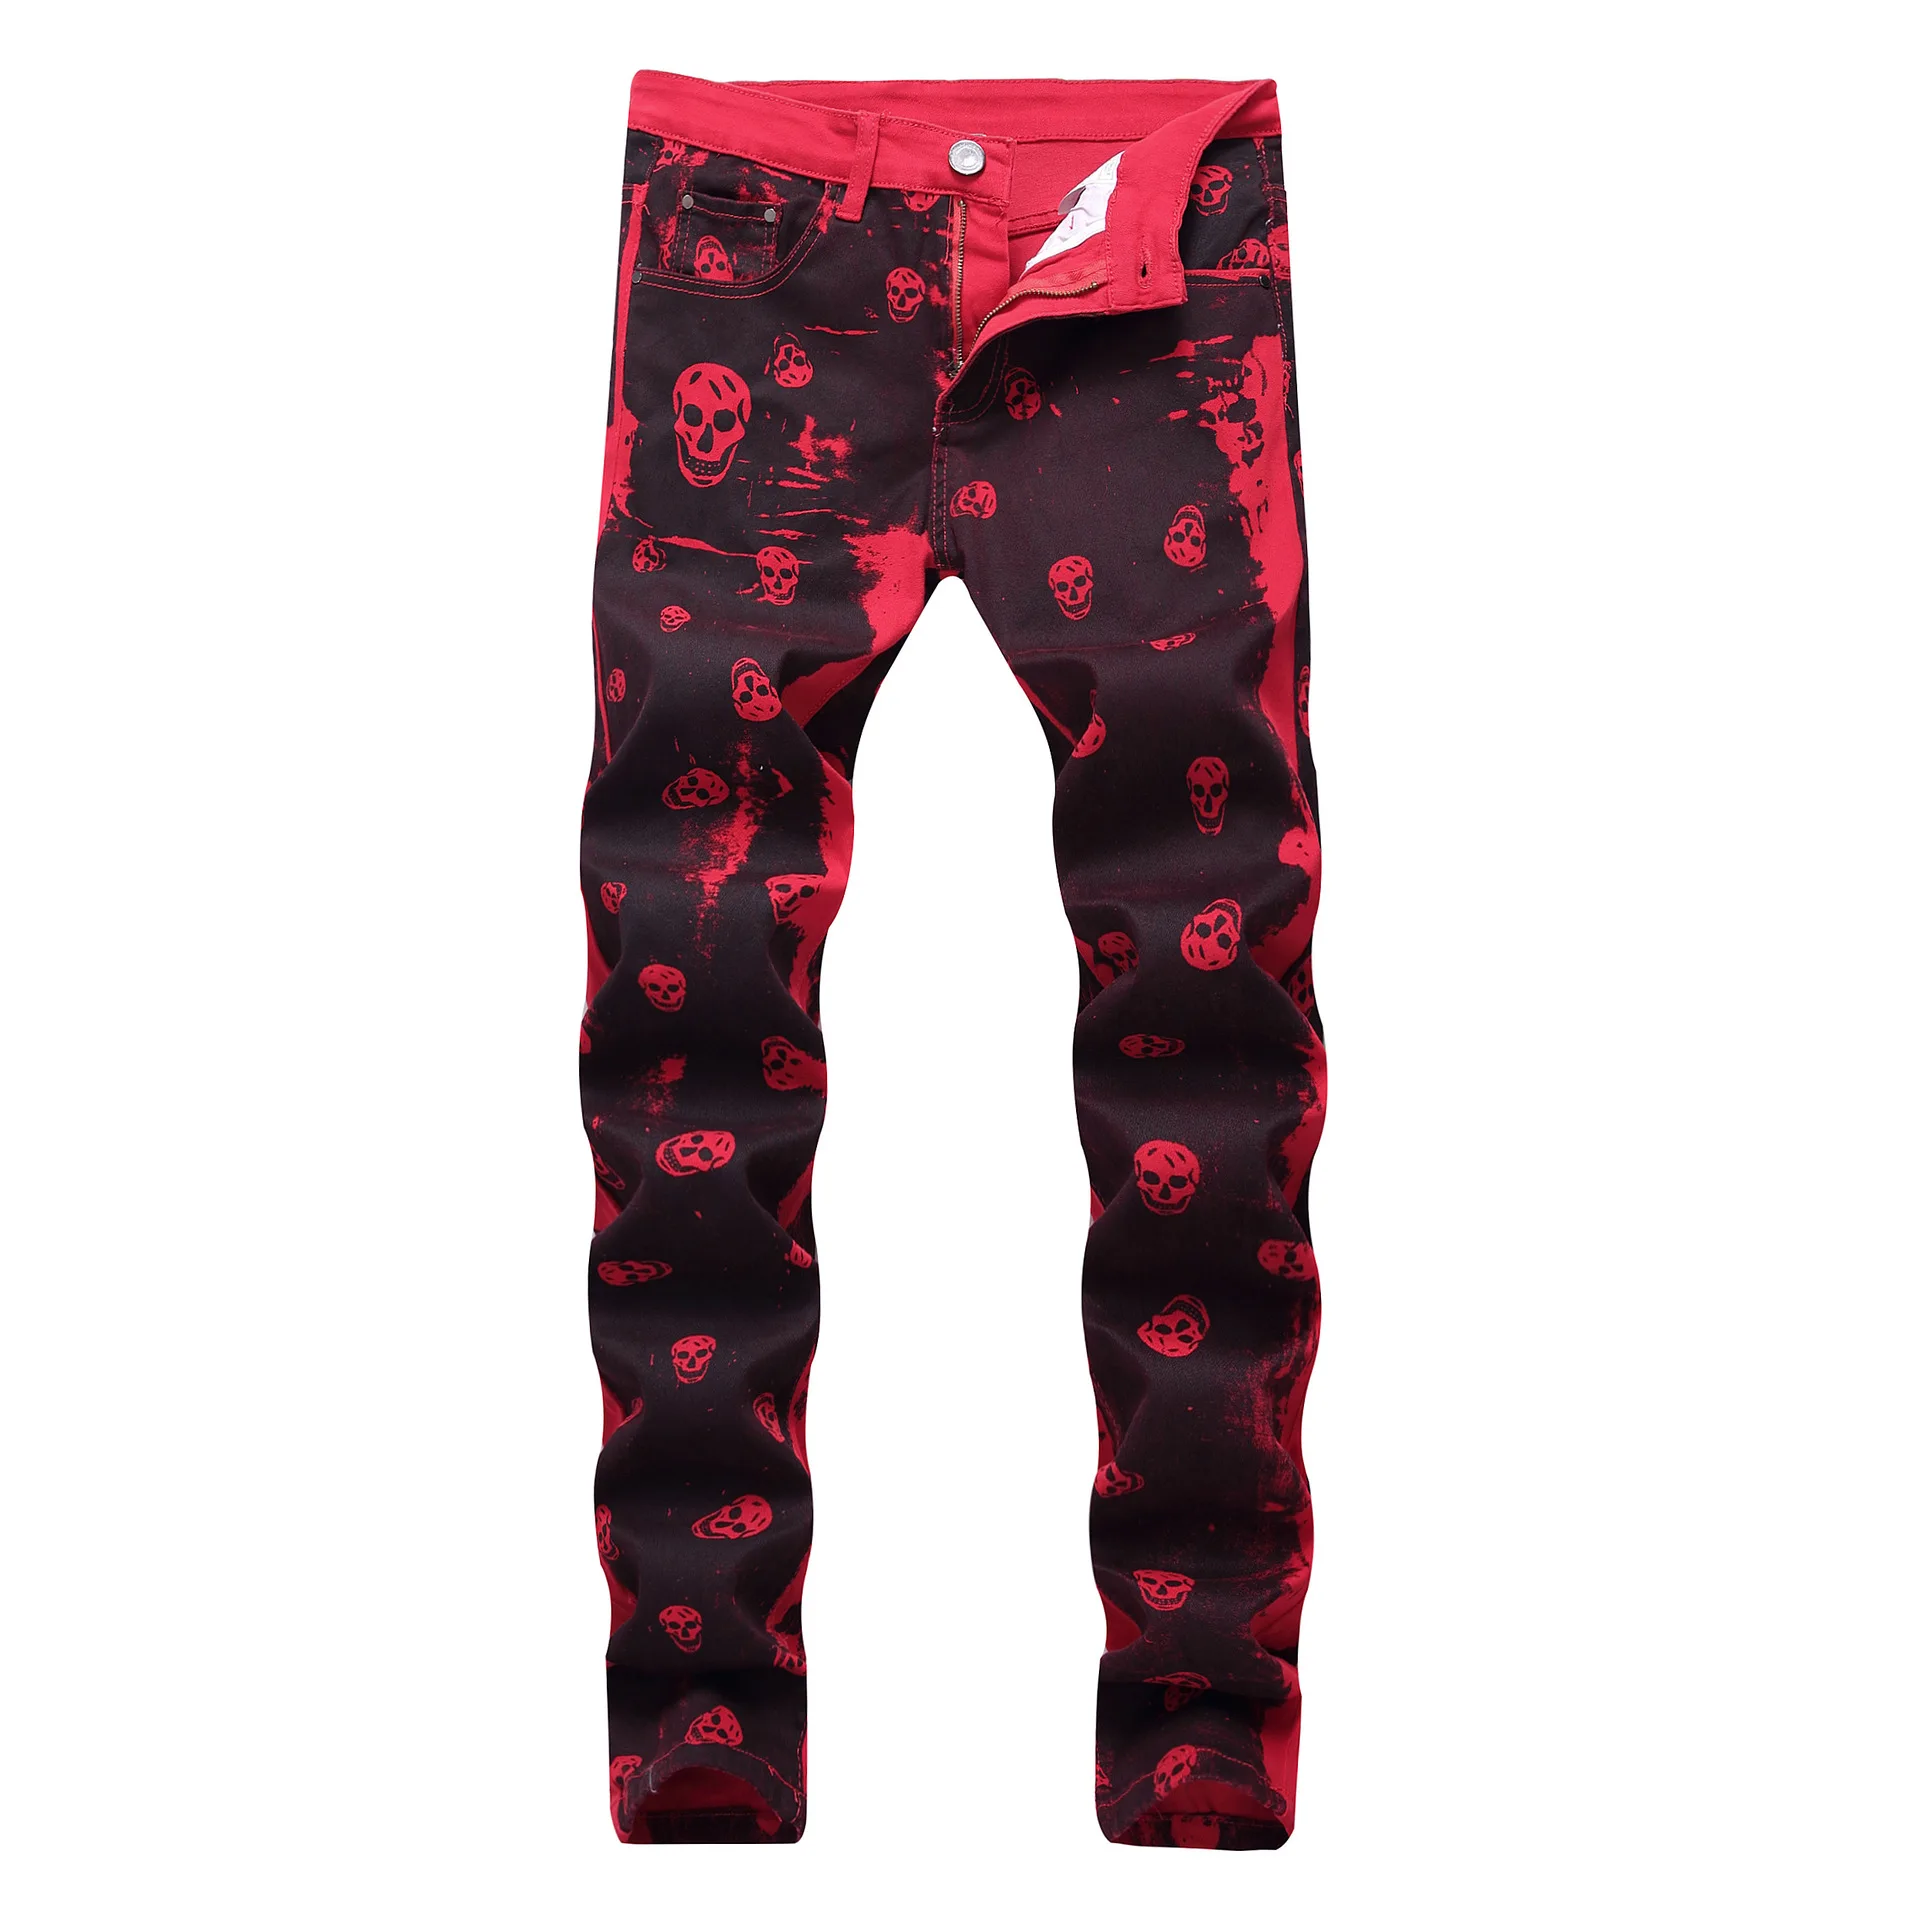 DIMI Male Slim Fit Red Denim Pants Long Trousers Autumn Mens Fashion Skeleton Skull Printed Night Club Personality Jeans